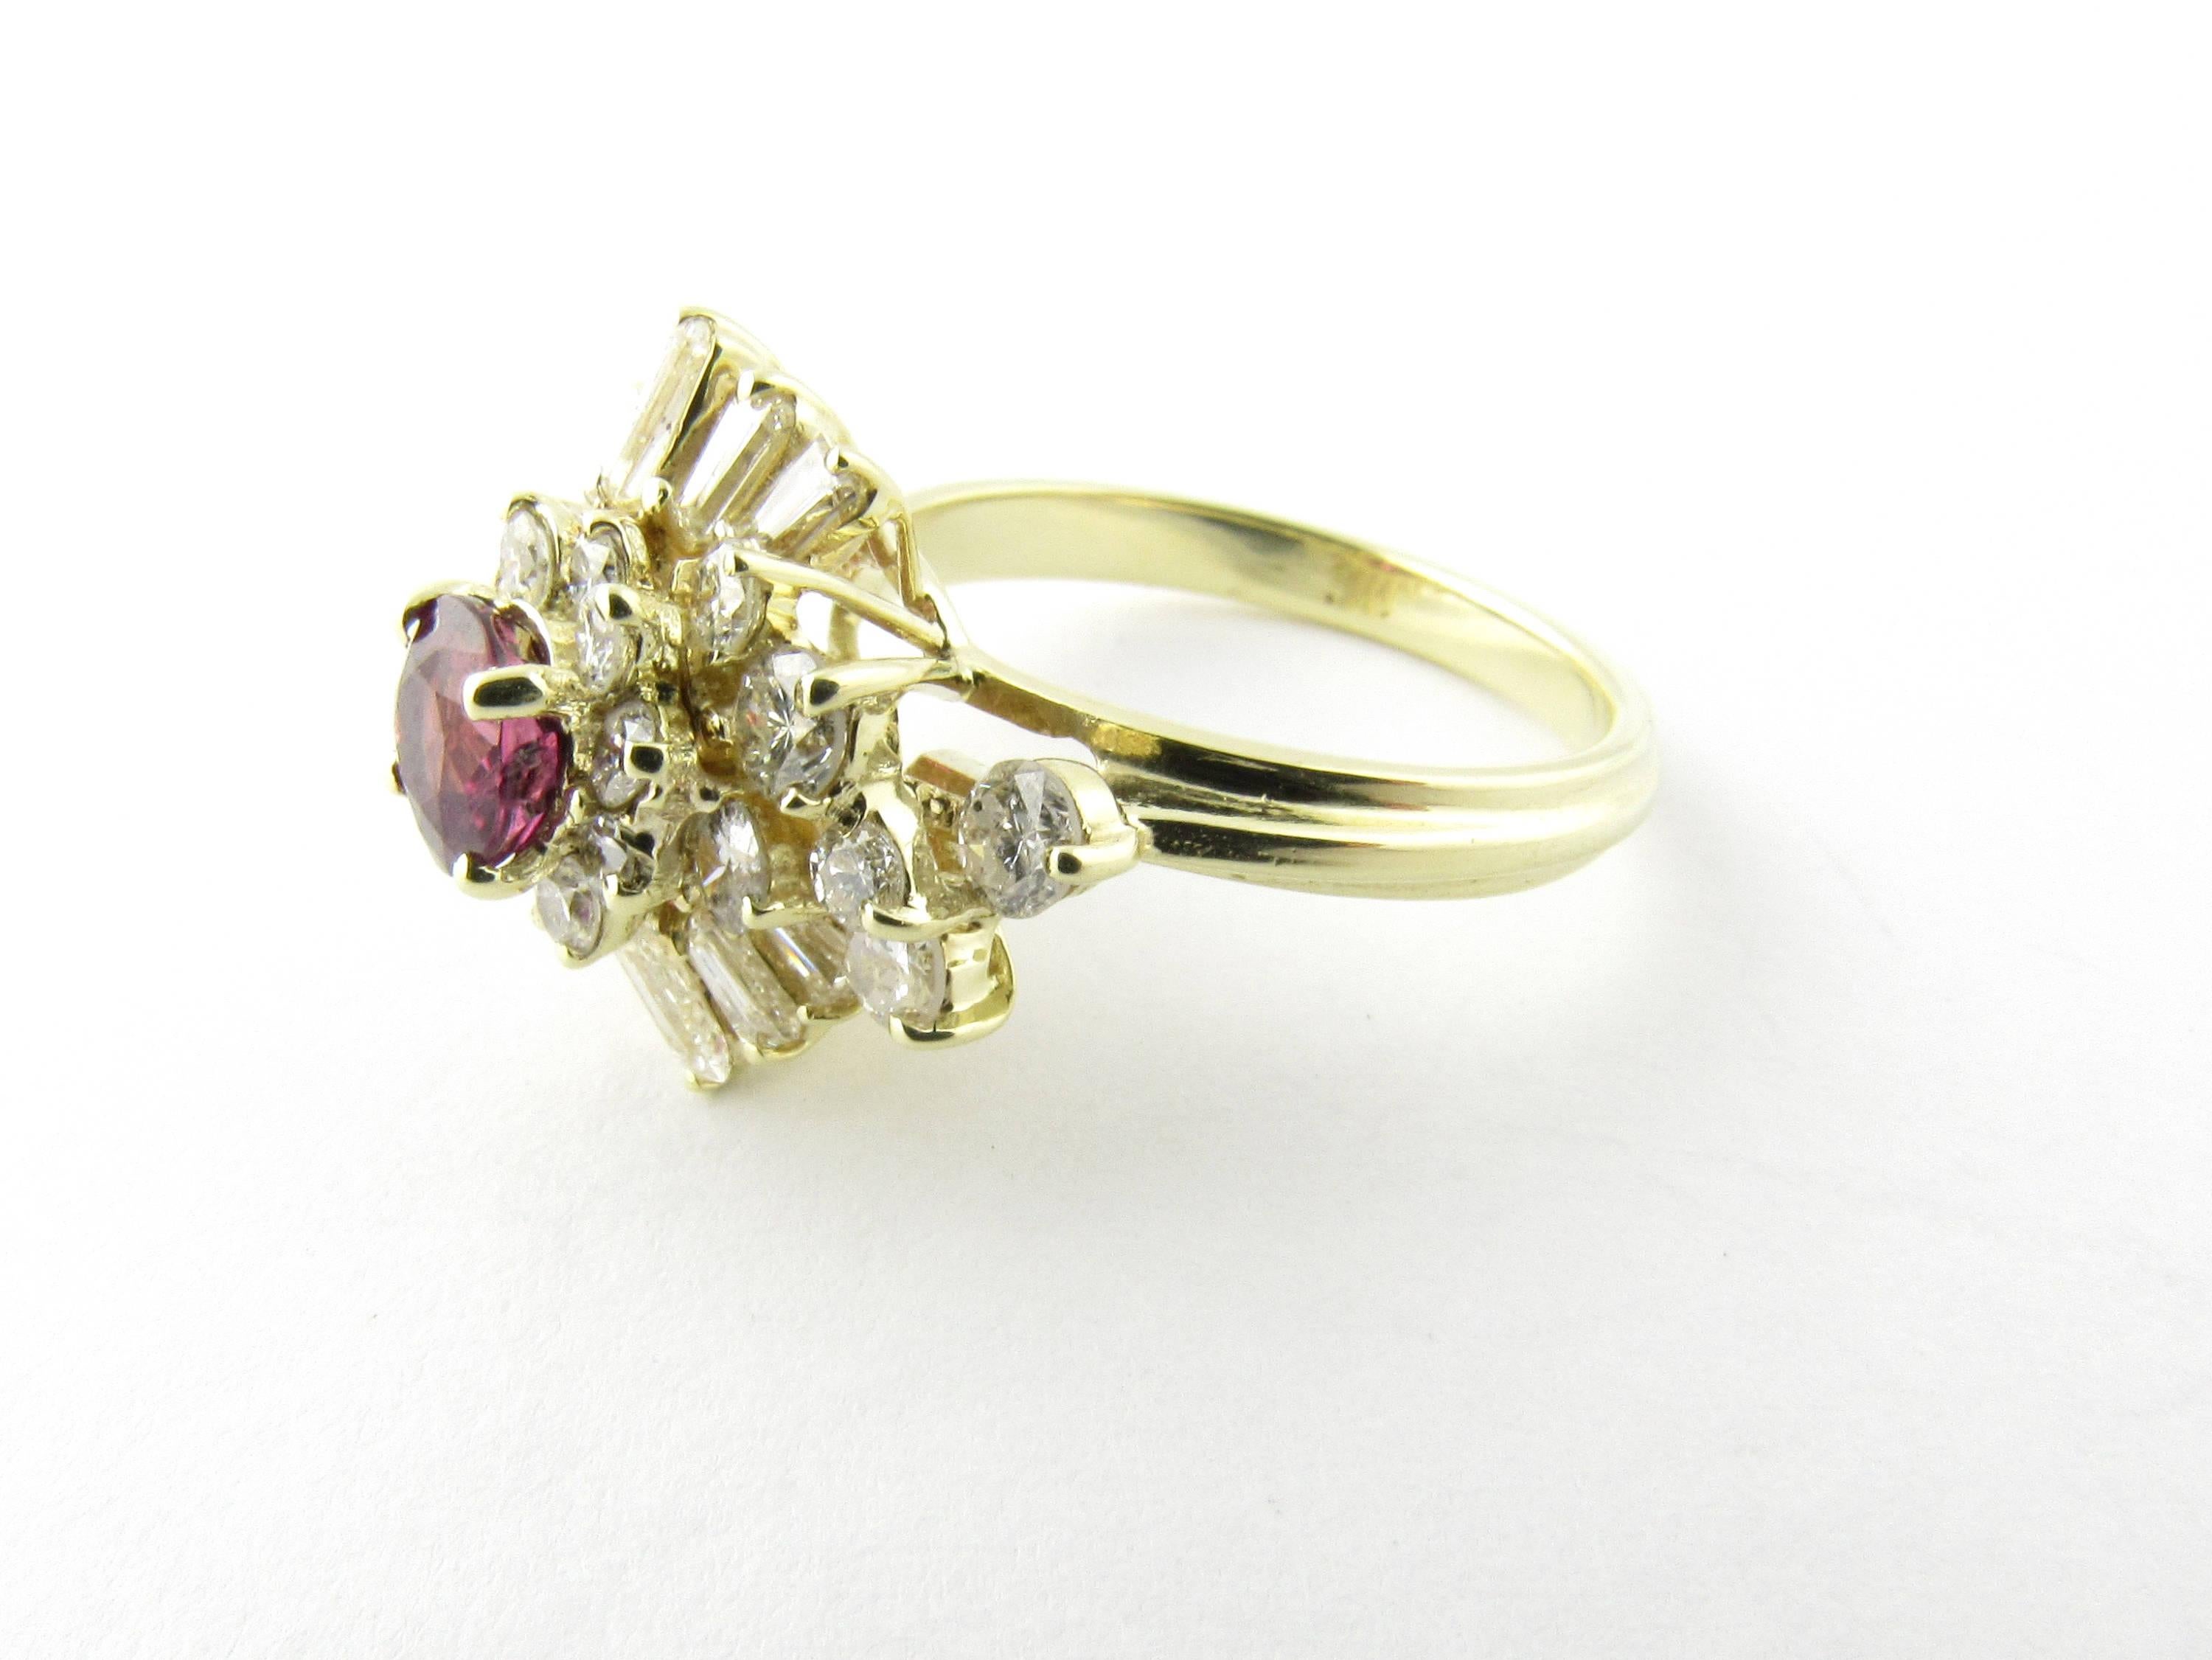 Vintage 14 Karat Yellow Gold Ruby and Diamond Ring Size 5.5

This fabulous ring features one genuine round ruby (5 mm) surrounded by 10 baguette diamond and 12 round brilliant cut diamonds set in 14K yellow gold. Top of ring measures 15 mm x 18 mm.